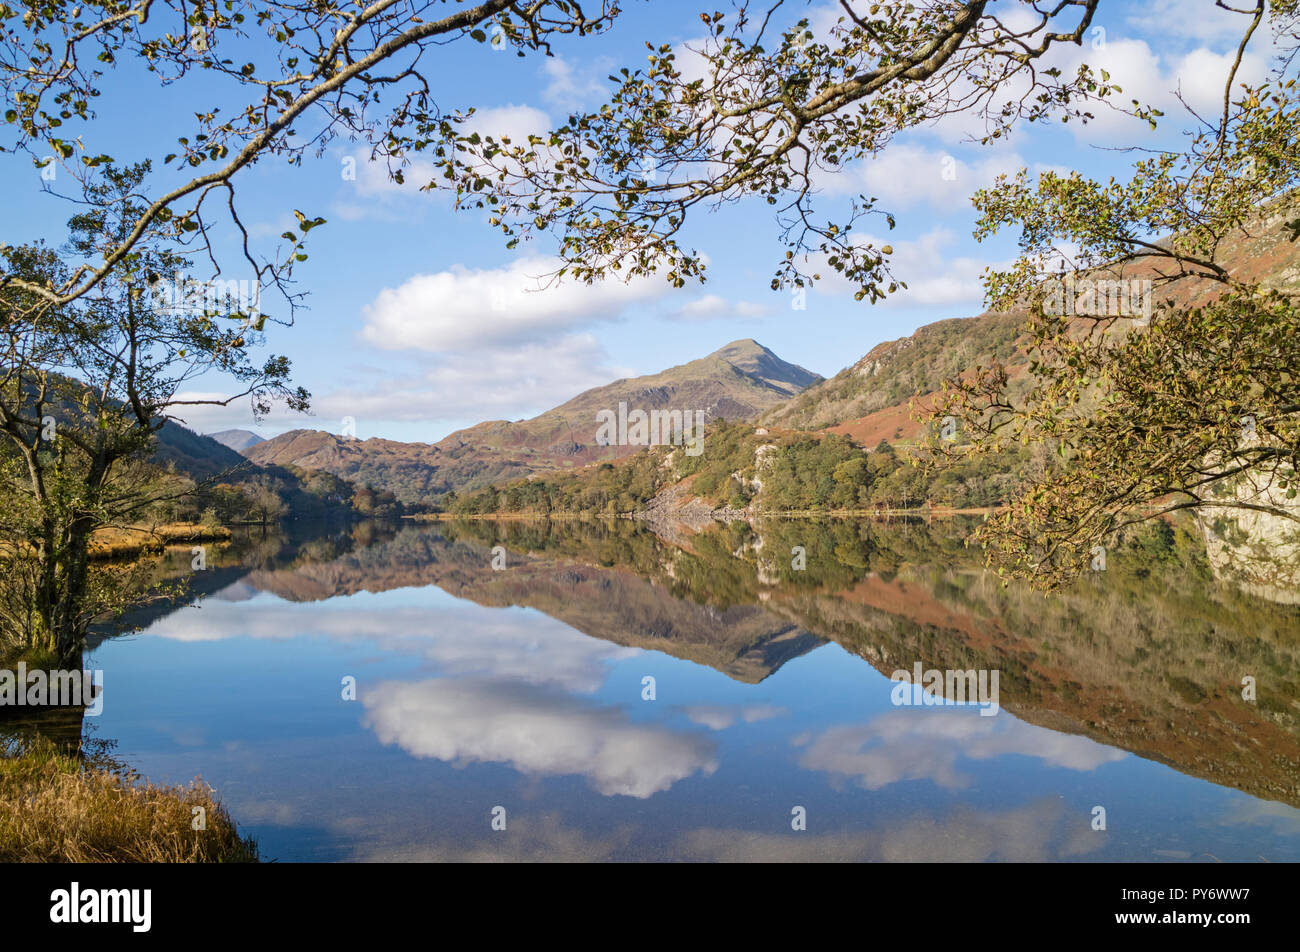 Autumn reflections on Llyn Gwynant in the Nant Gwynant Valley, Snowdonia National Park, North Wales, UK Stock Photo